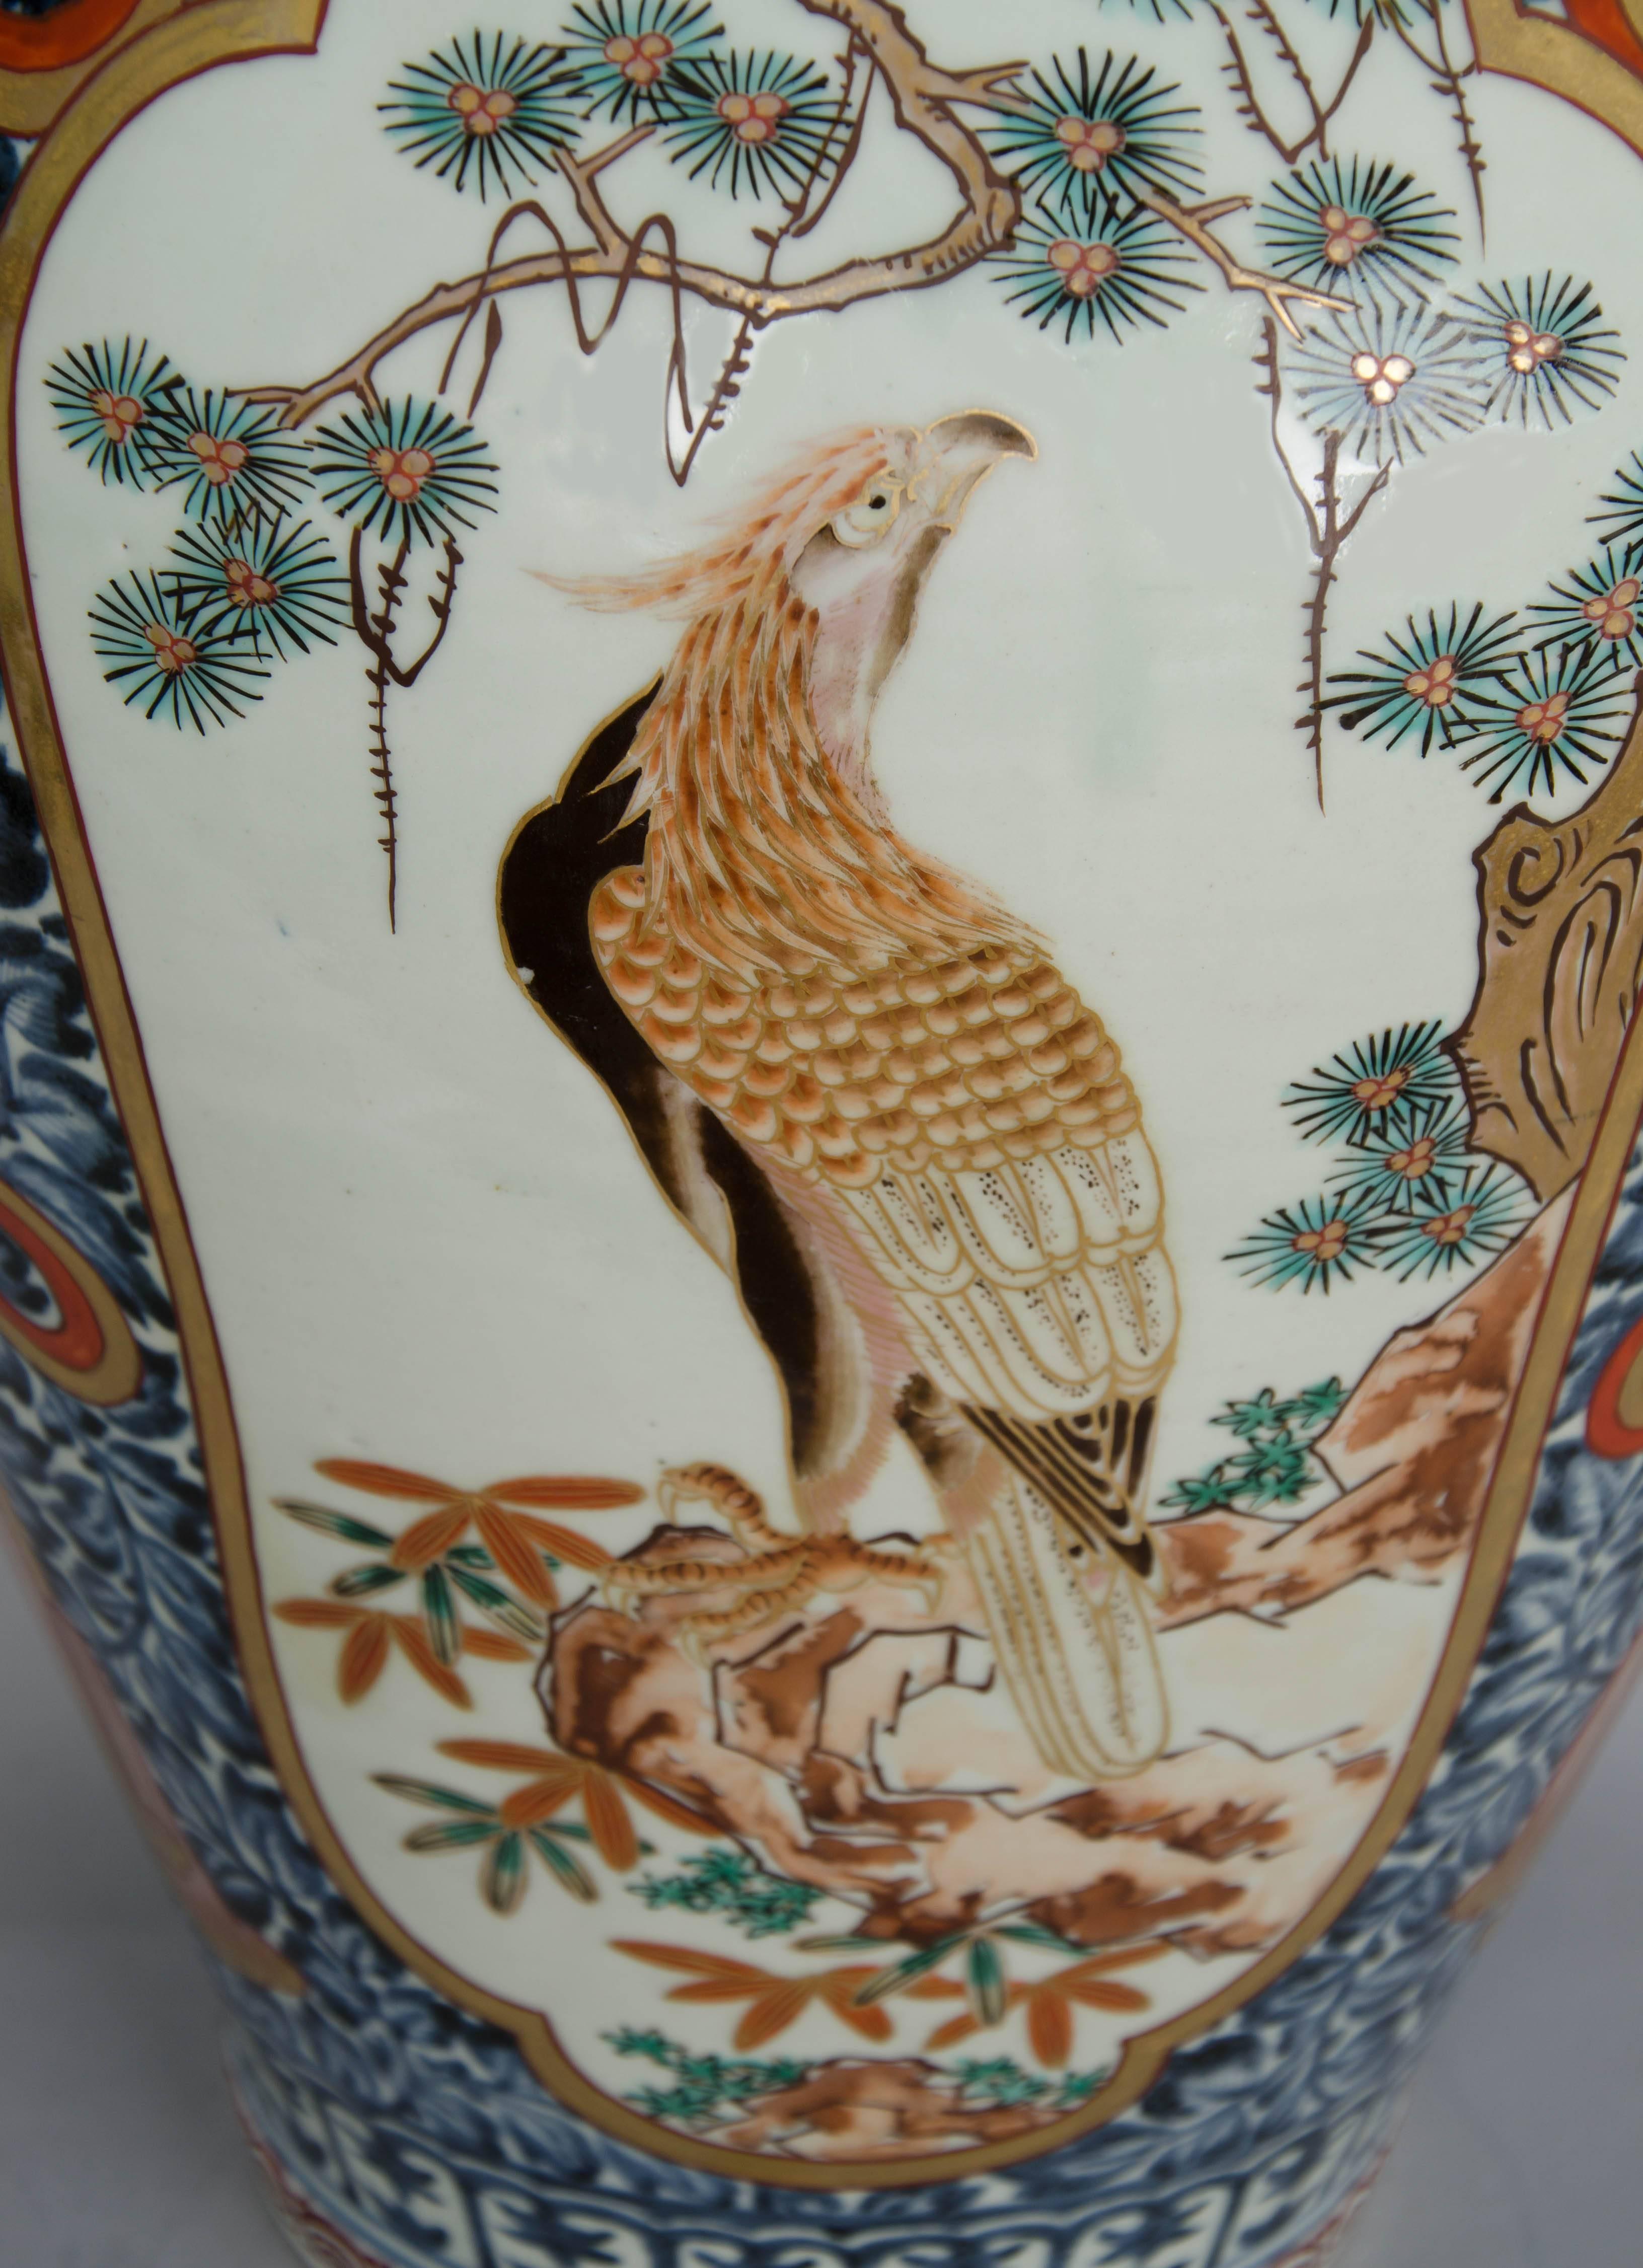 An exceptional quality Japanese Imari vase dating from ca 1700 and featuring an excellent decoration: three panels depicting an hawk resting amongst pine tree branches and shi shi lions fighting in a surround of rocks, bamboo and peonies. Every